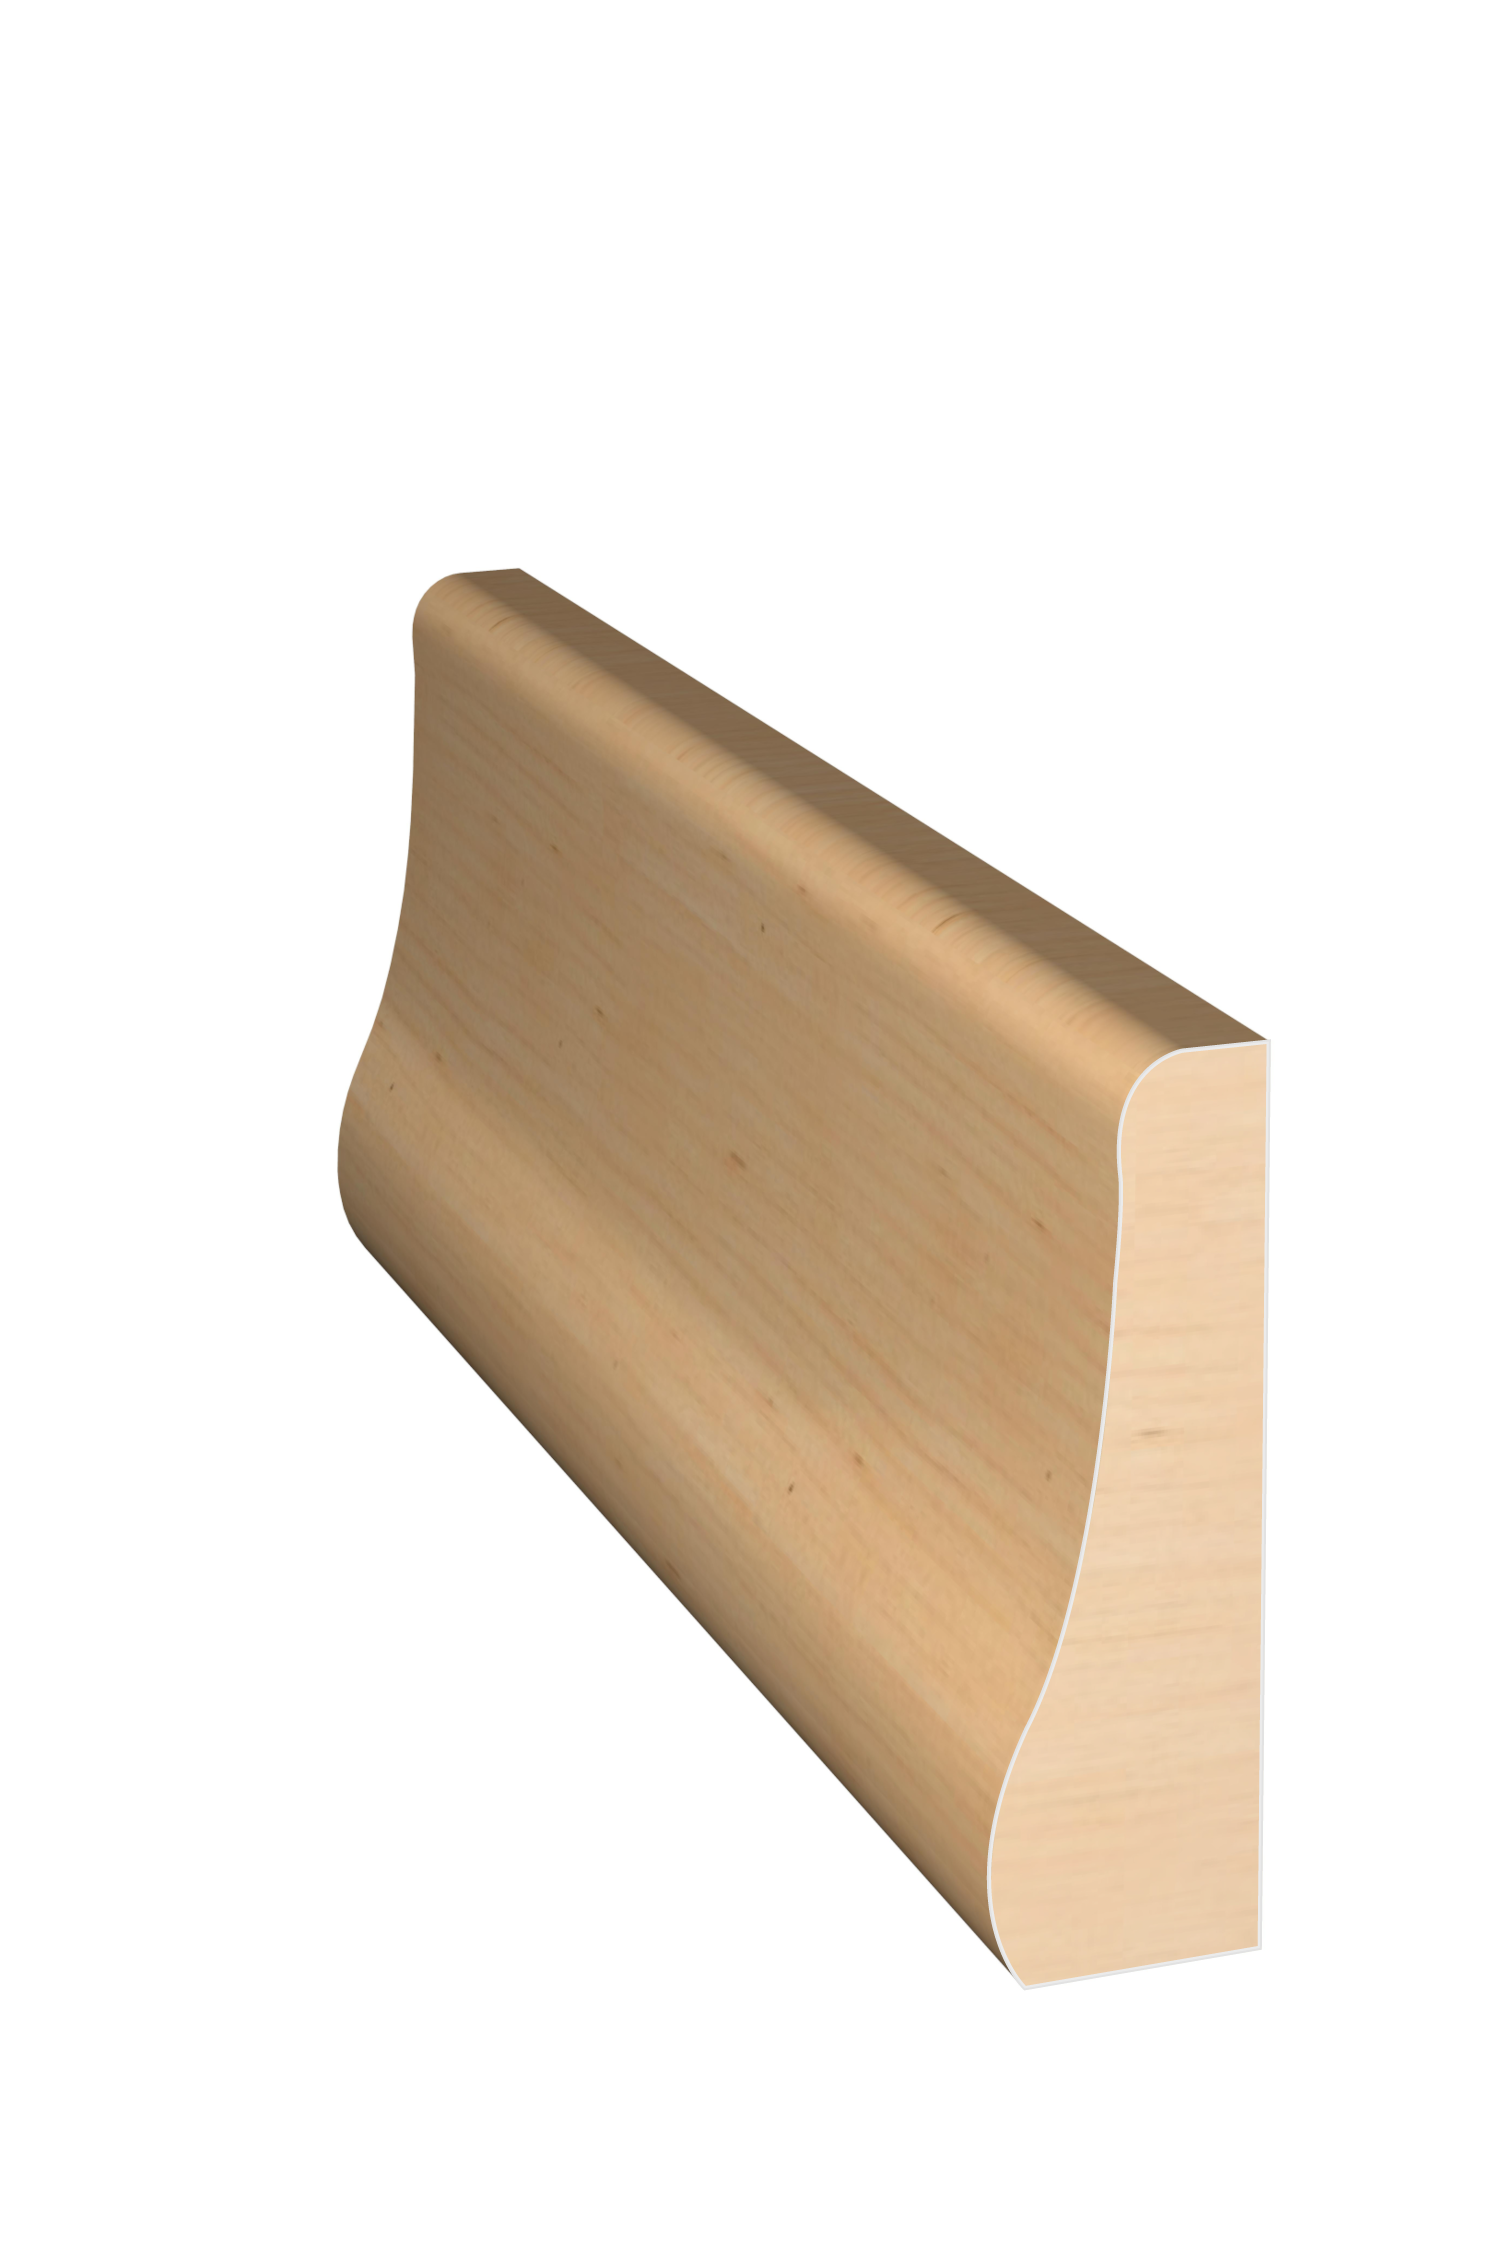 Three dimensional rendering of custom casing wood molding CAPL2148 made by Public Lumber Company in Detroit.